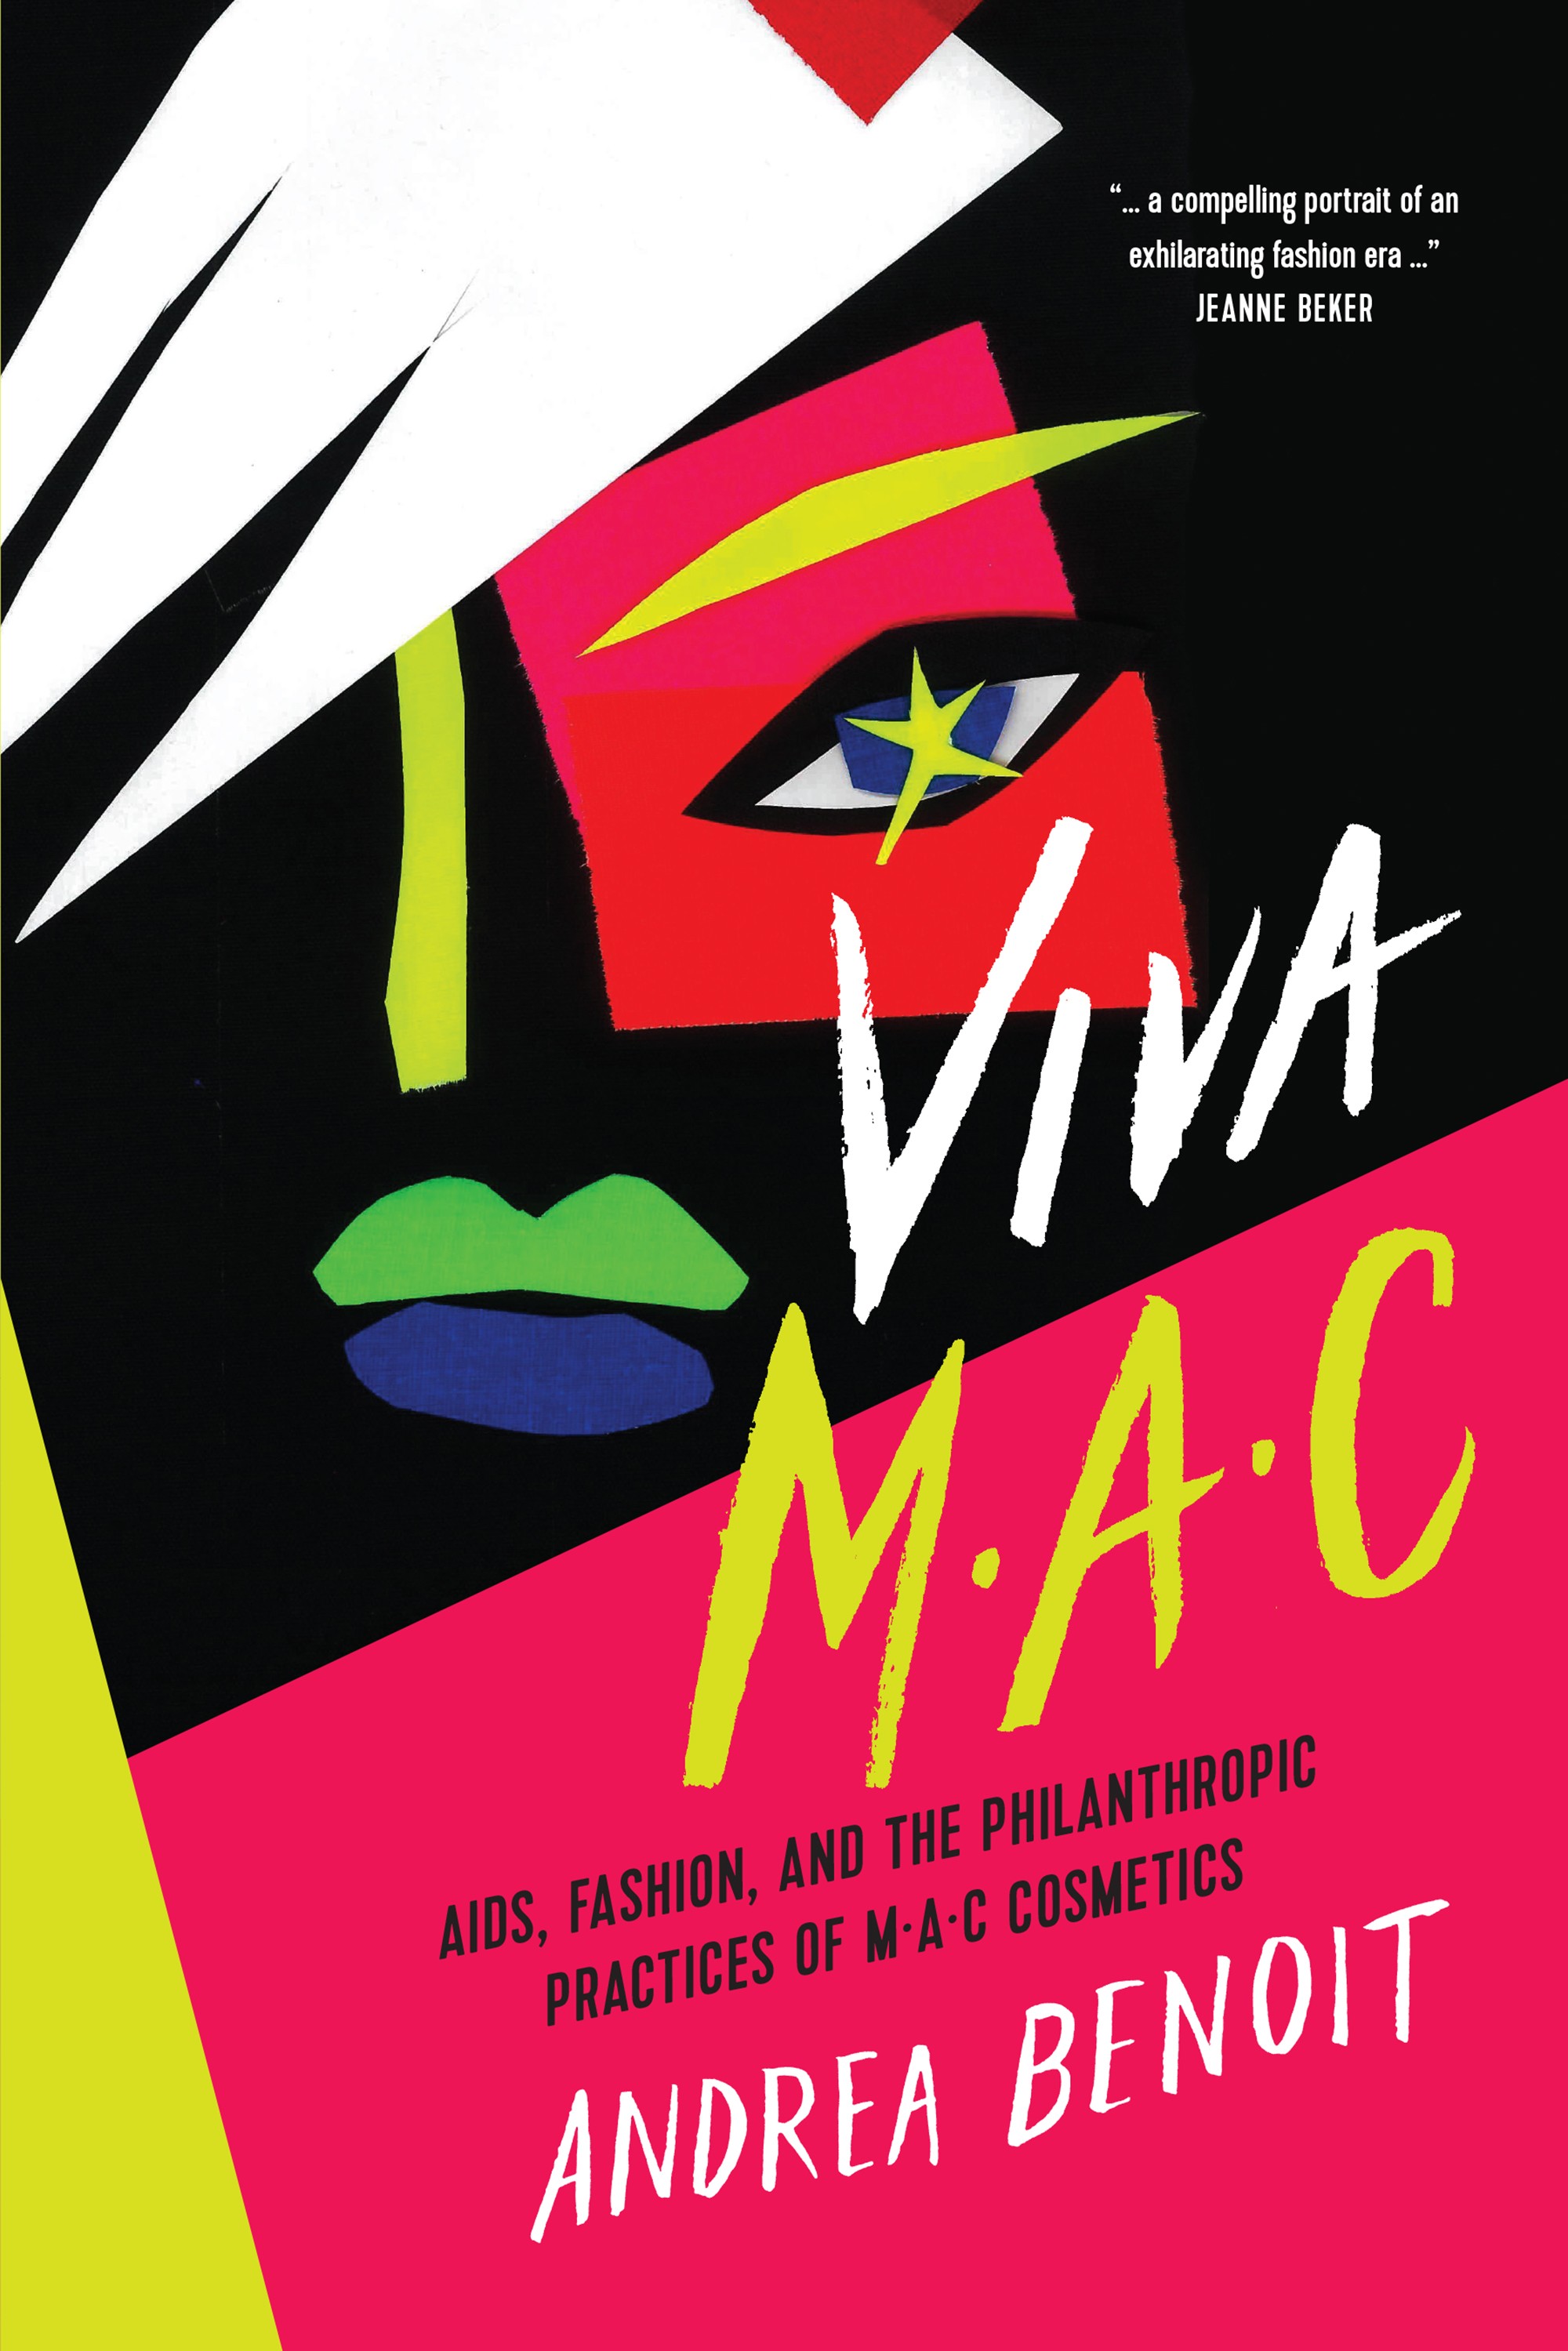 text on bookcover: Viva MAC: AIDS, Fashion, and the Philanthropic Practices of MˑAˑC Cosmetics 